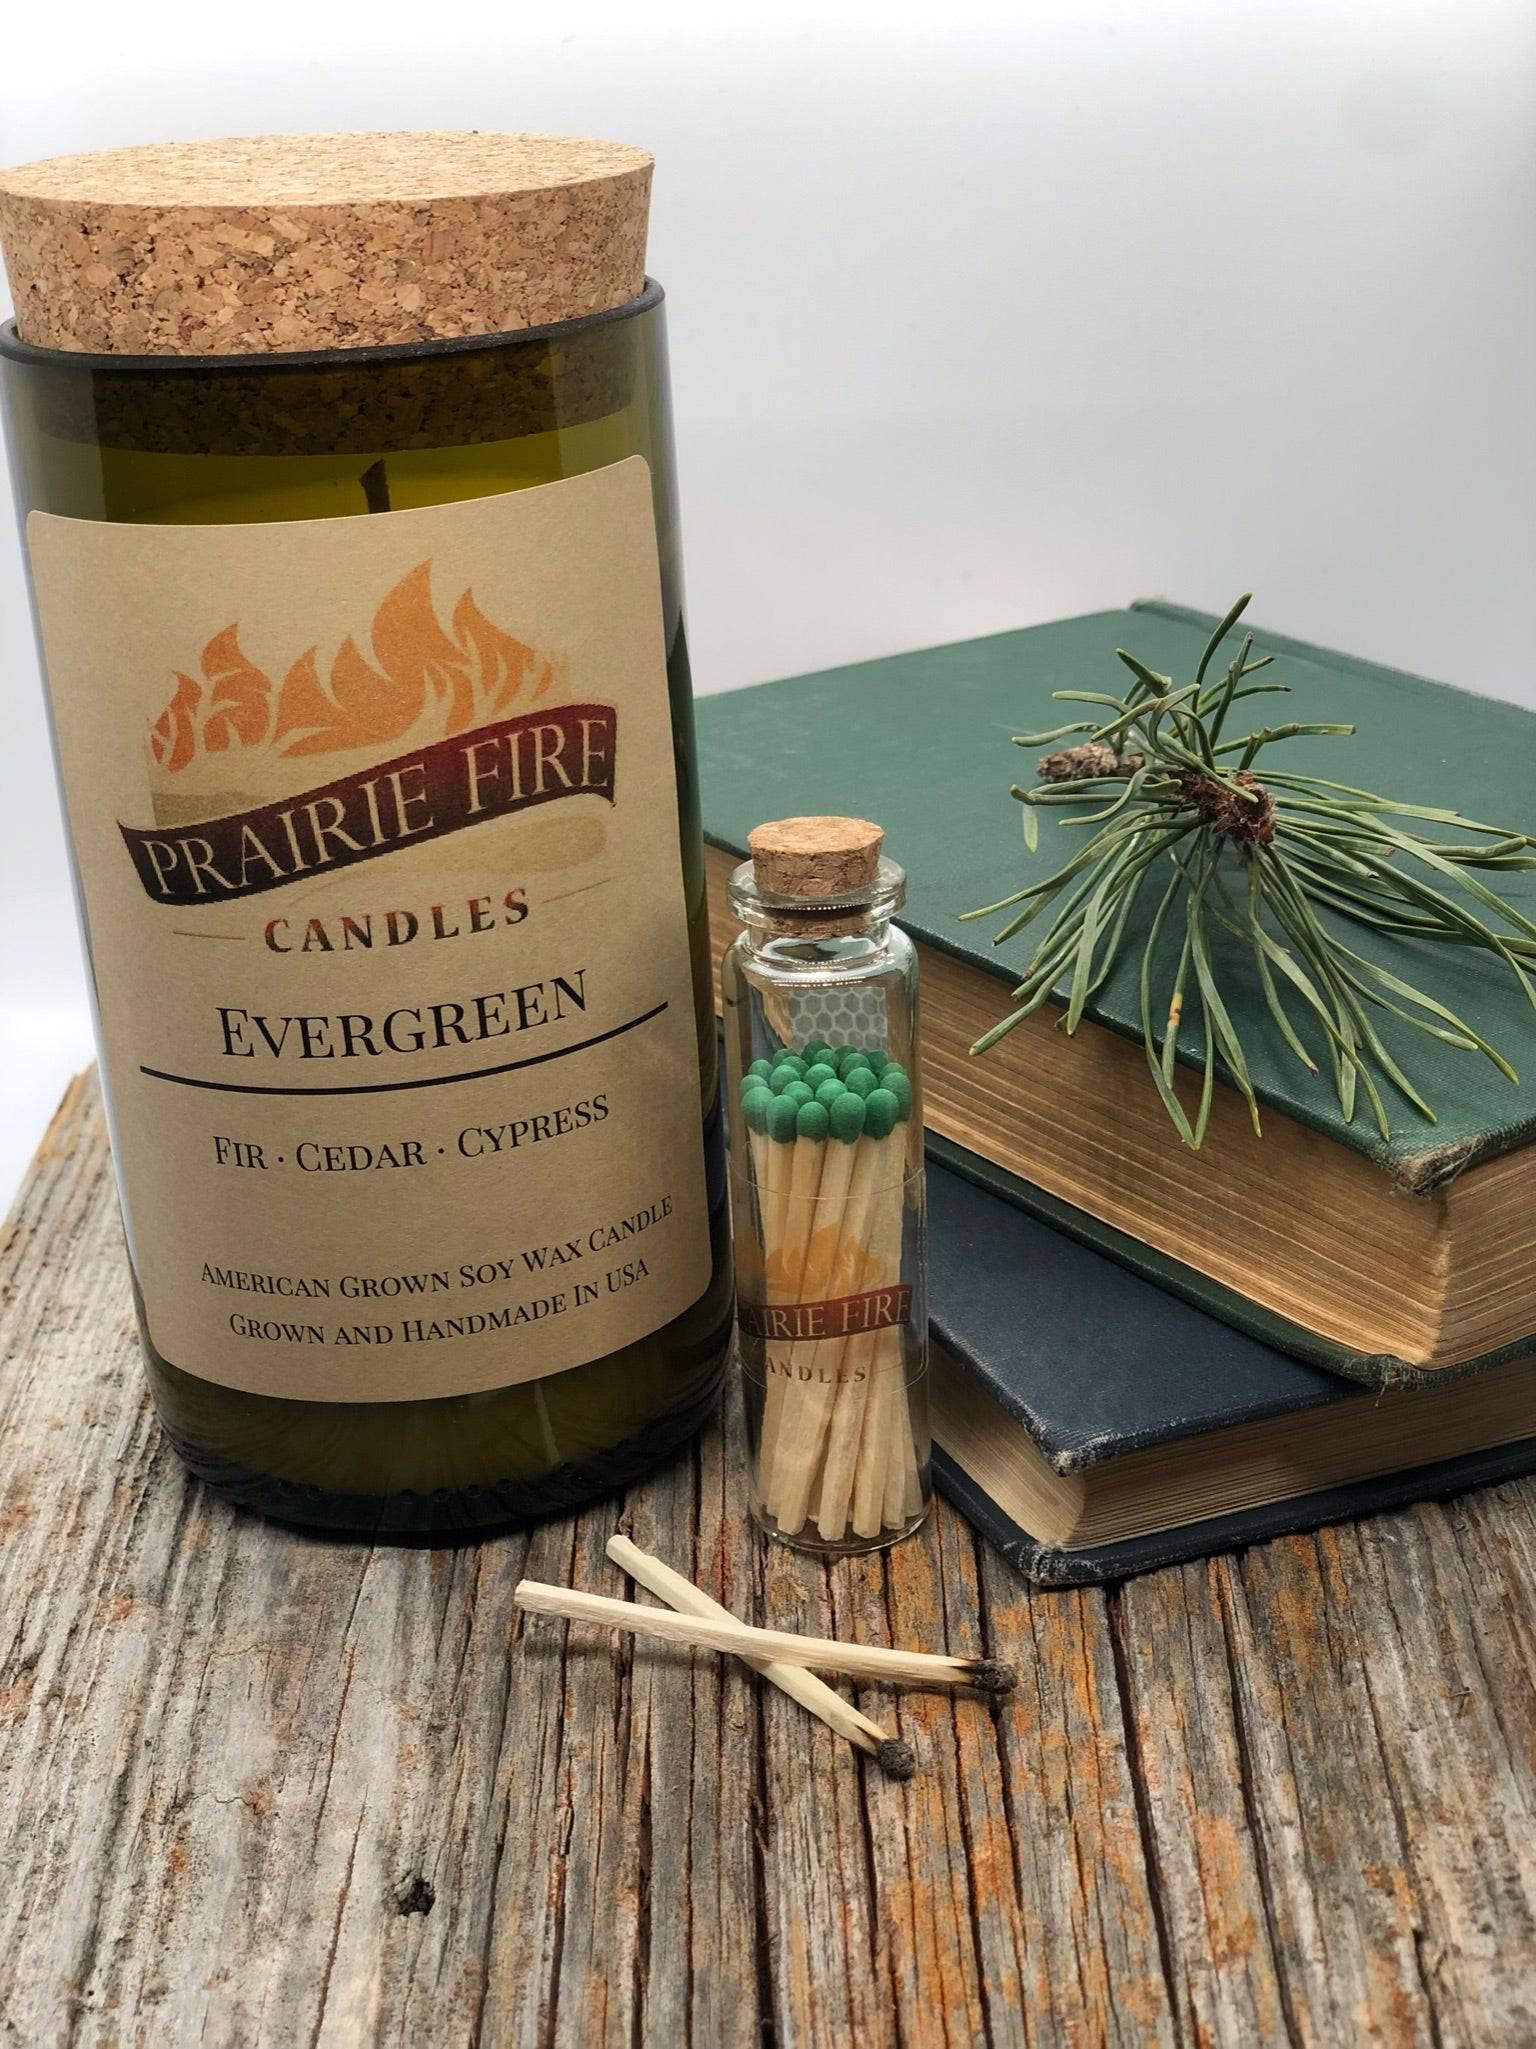 Evergreen Soy Wax Candle | Repurposed Wine Bottle Candle Natural Cork | Handmade in USA Candle | Eco-Friendly Candle | Non-Toxic Soy Candle - Prairie Fire Candles